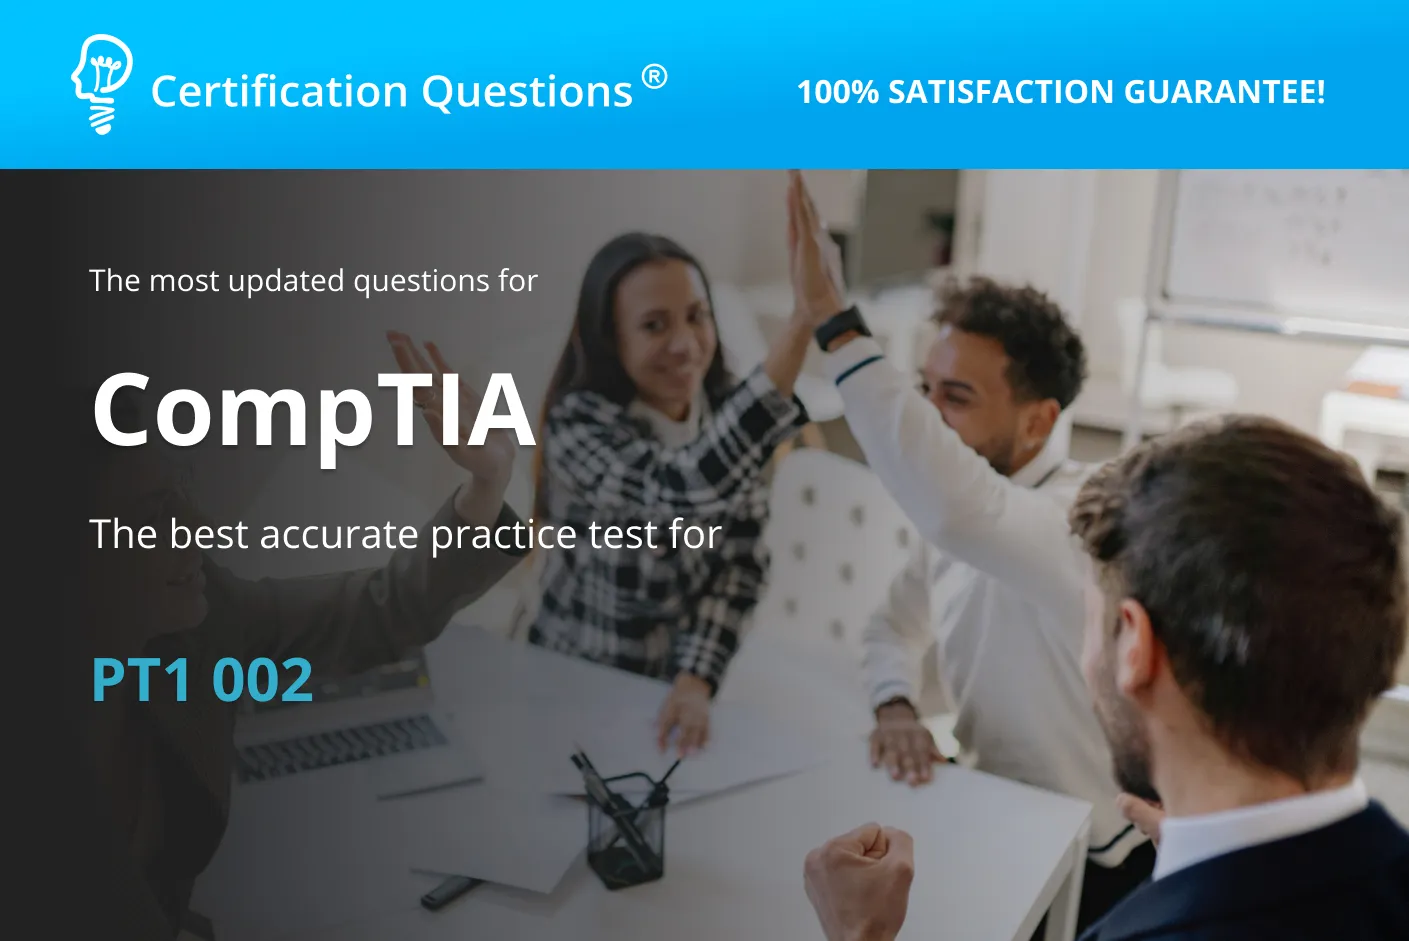 This image represents the guide about CompTIA Pt1 002